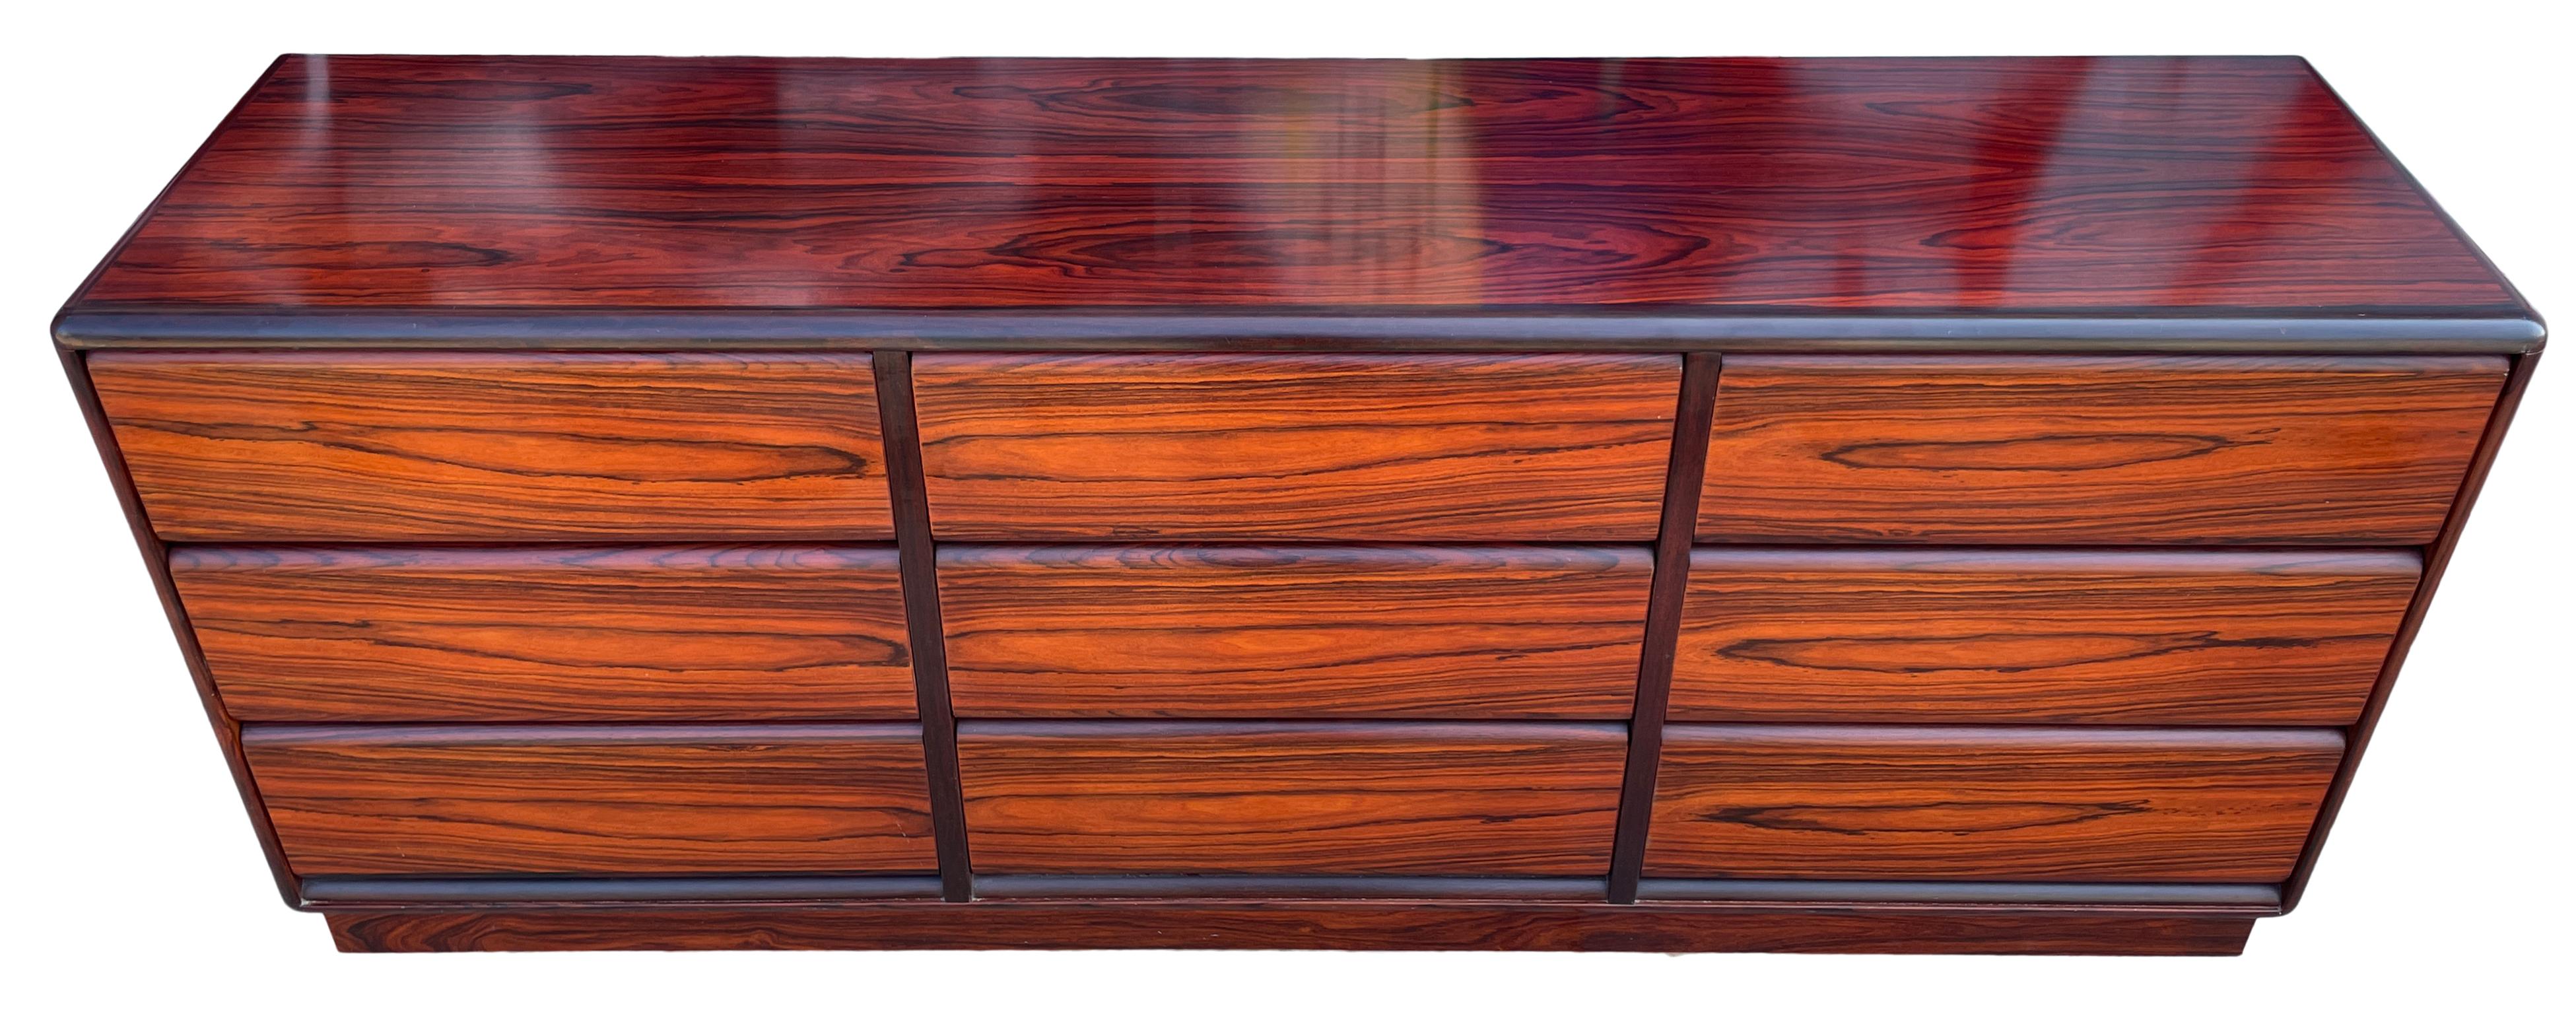 Very clean mid-century Danish modern rosewood 9 drawer credenza or dresser. All drawers slide smooth on metal glides. Beautiful Rosewood grain. Rounded corners on a rosewood base. Made In Denmark labeled Brouer Mobler. Located in Brooklyn